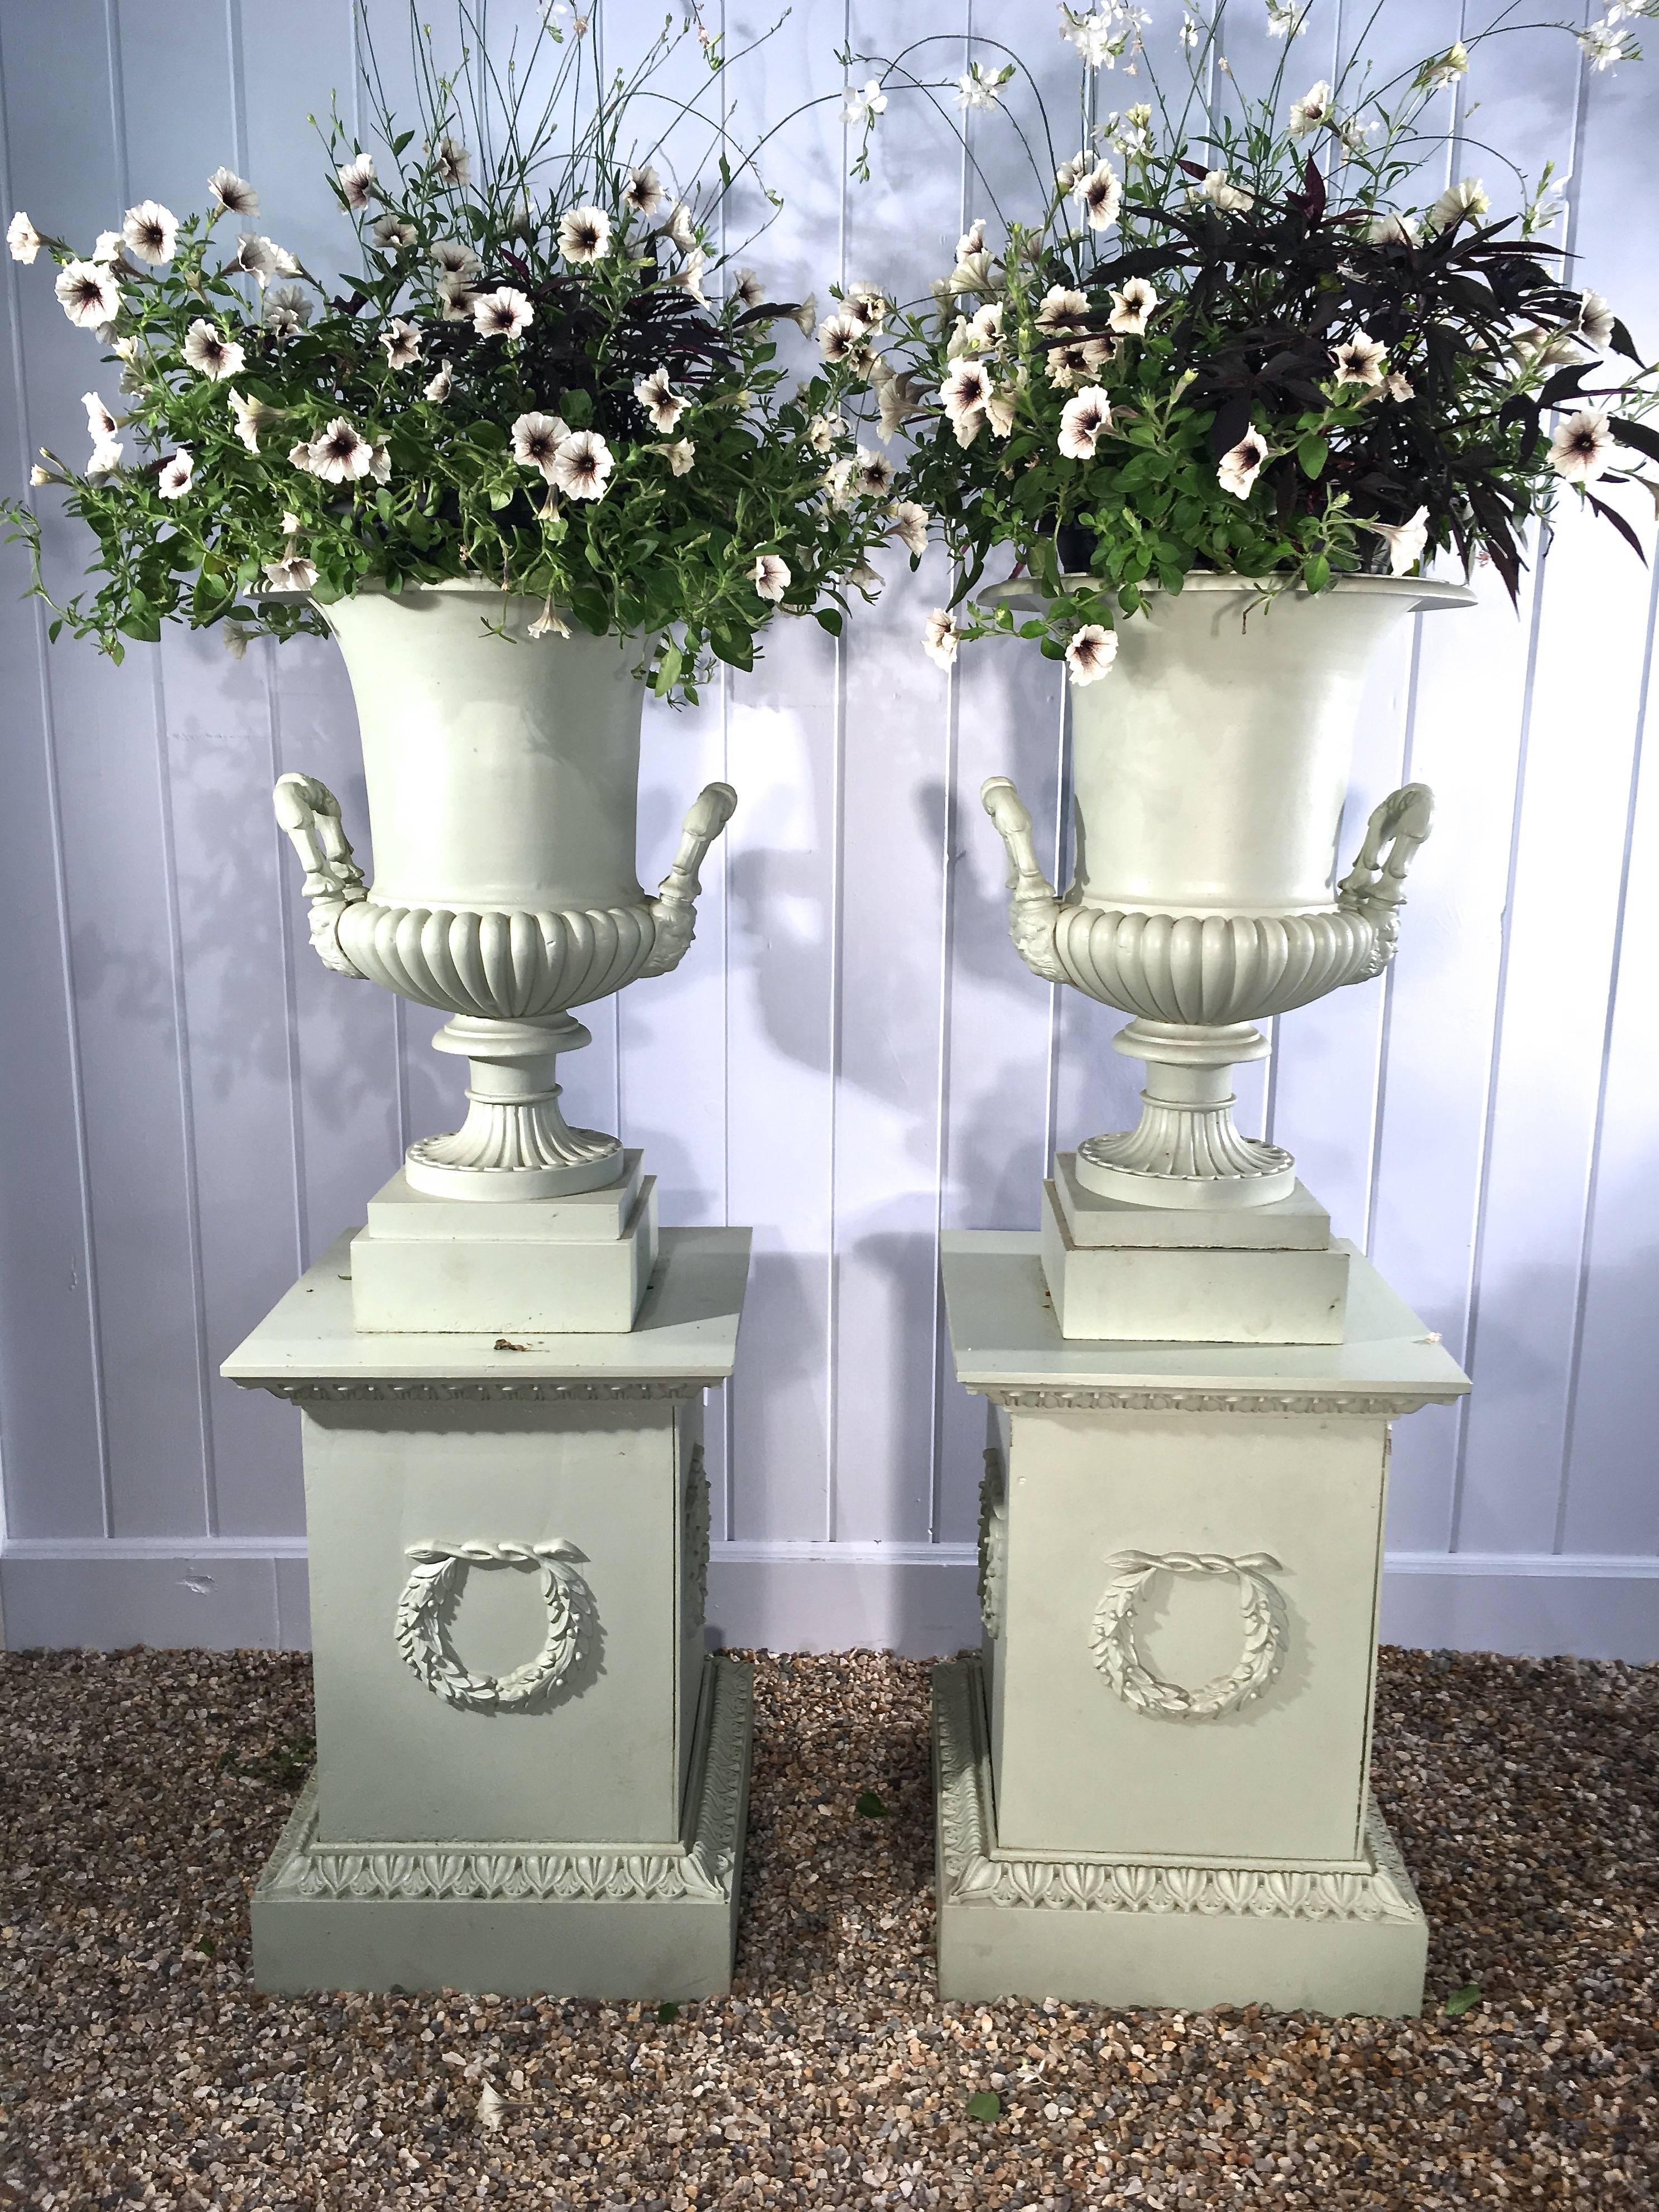 These are an outstanding pair of cast iron campana-form urns with plain everted rims, quarter-lobed bodies, and flared masked handles on reeded round feet. Surmounted on a conforming pair of cast iron plinths with egg and dart borders and wreathed